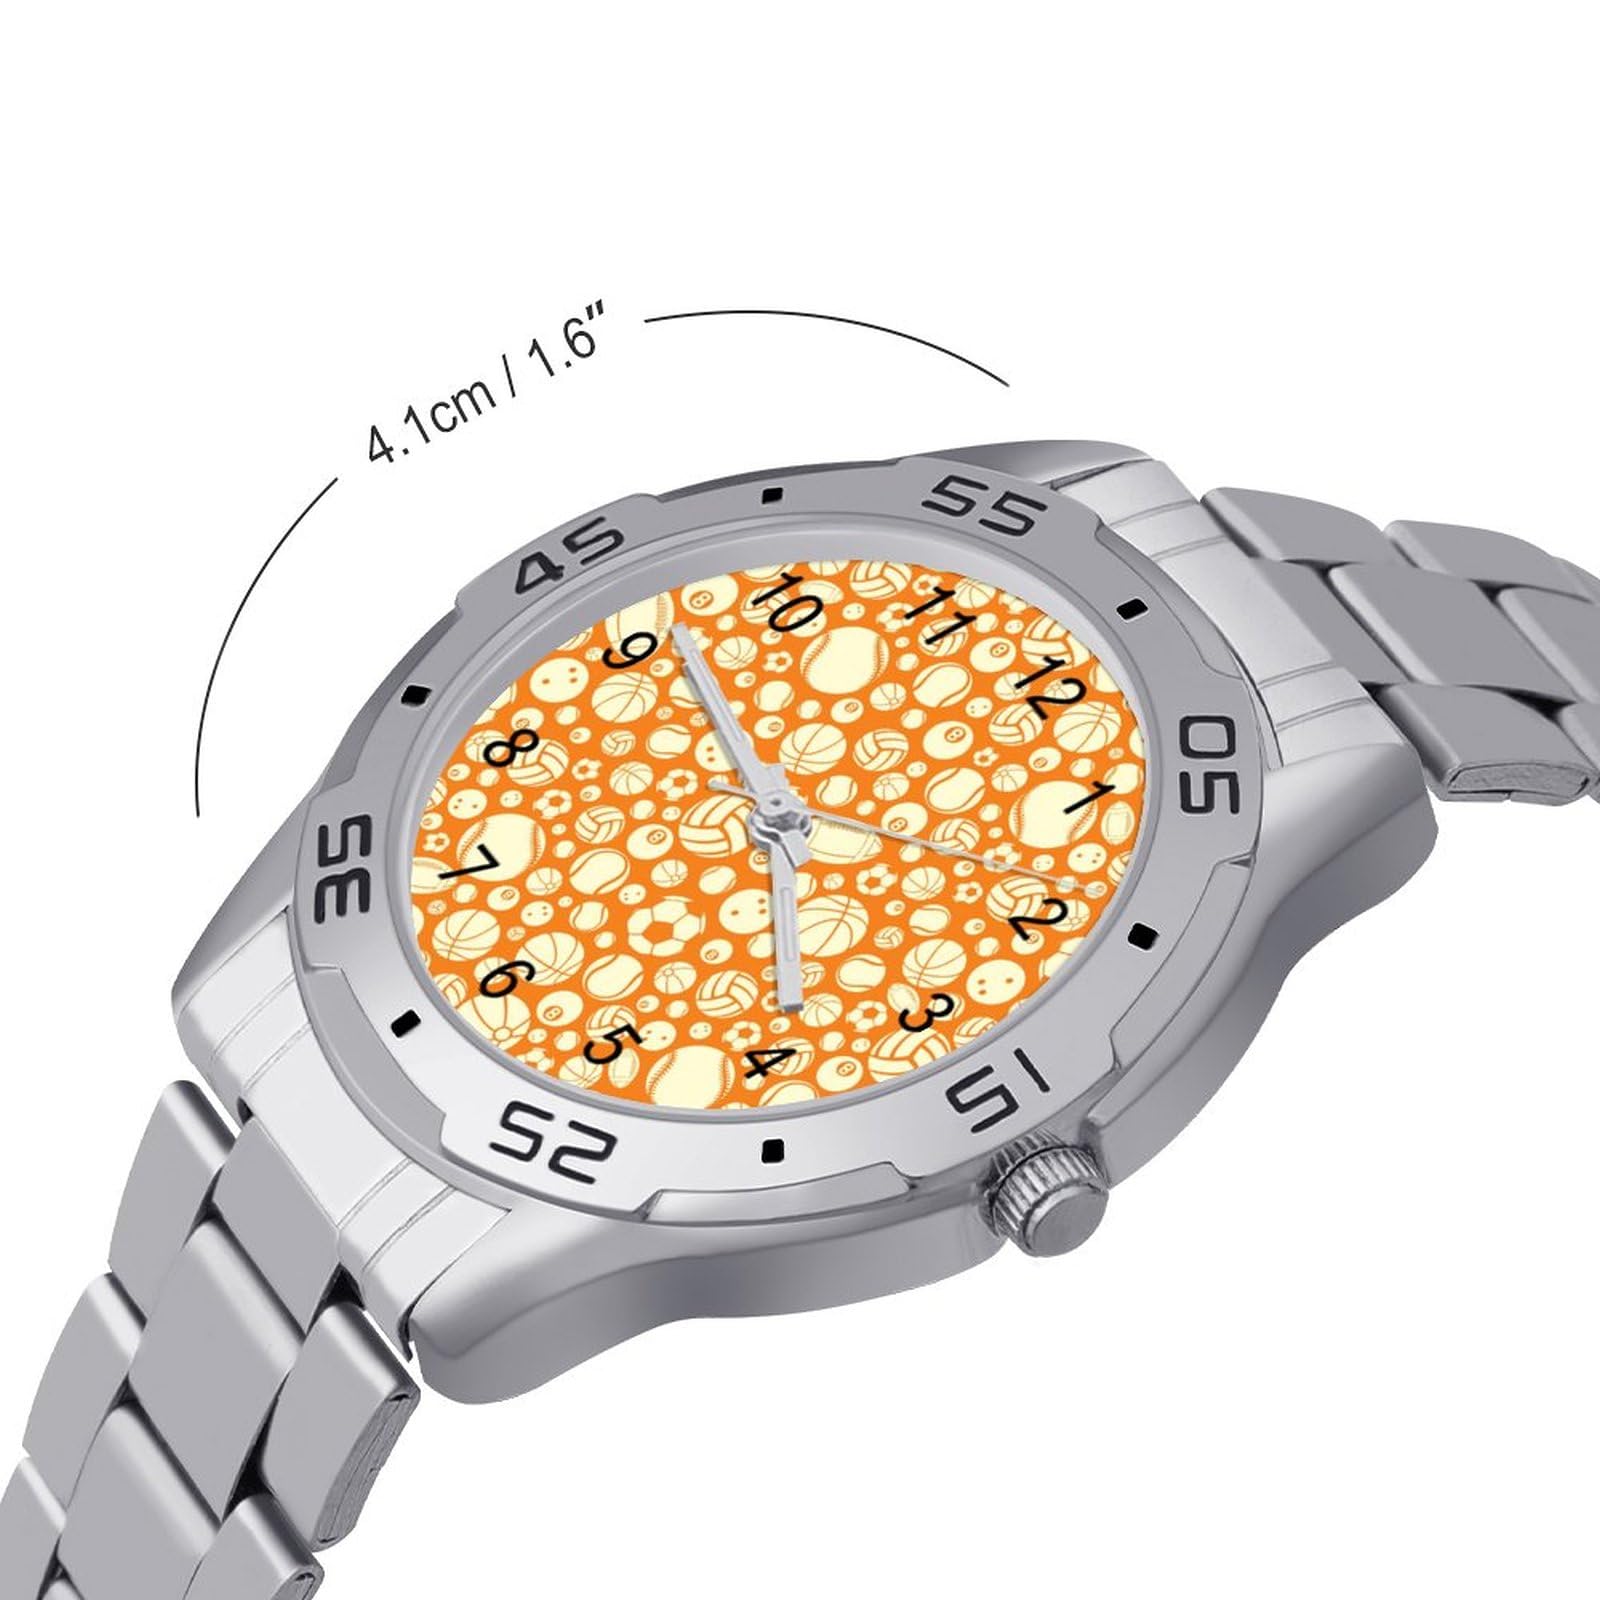 Balls Pattern Stainless Steel Band Business Watch Dress Wrist Unique Luxury Work Casual Waterproof Watches